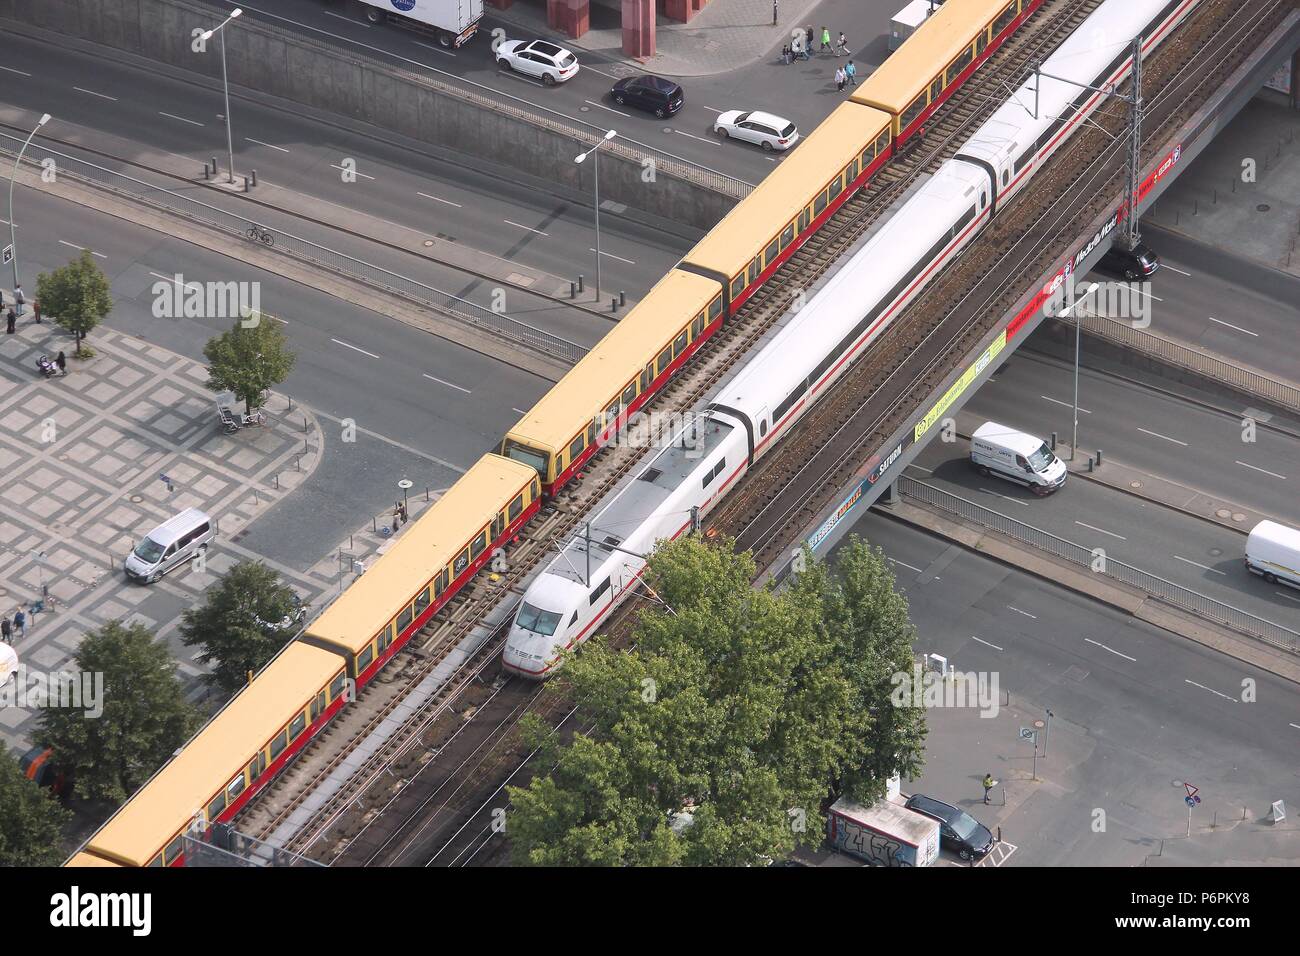 BERLIN, GERMANY - AUGUST 26, 2014: People ride Intercity train in Berlin. In 2009 ICE Express trains carried more than 77 million passengers. Stock Photo